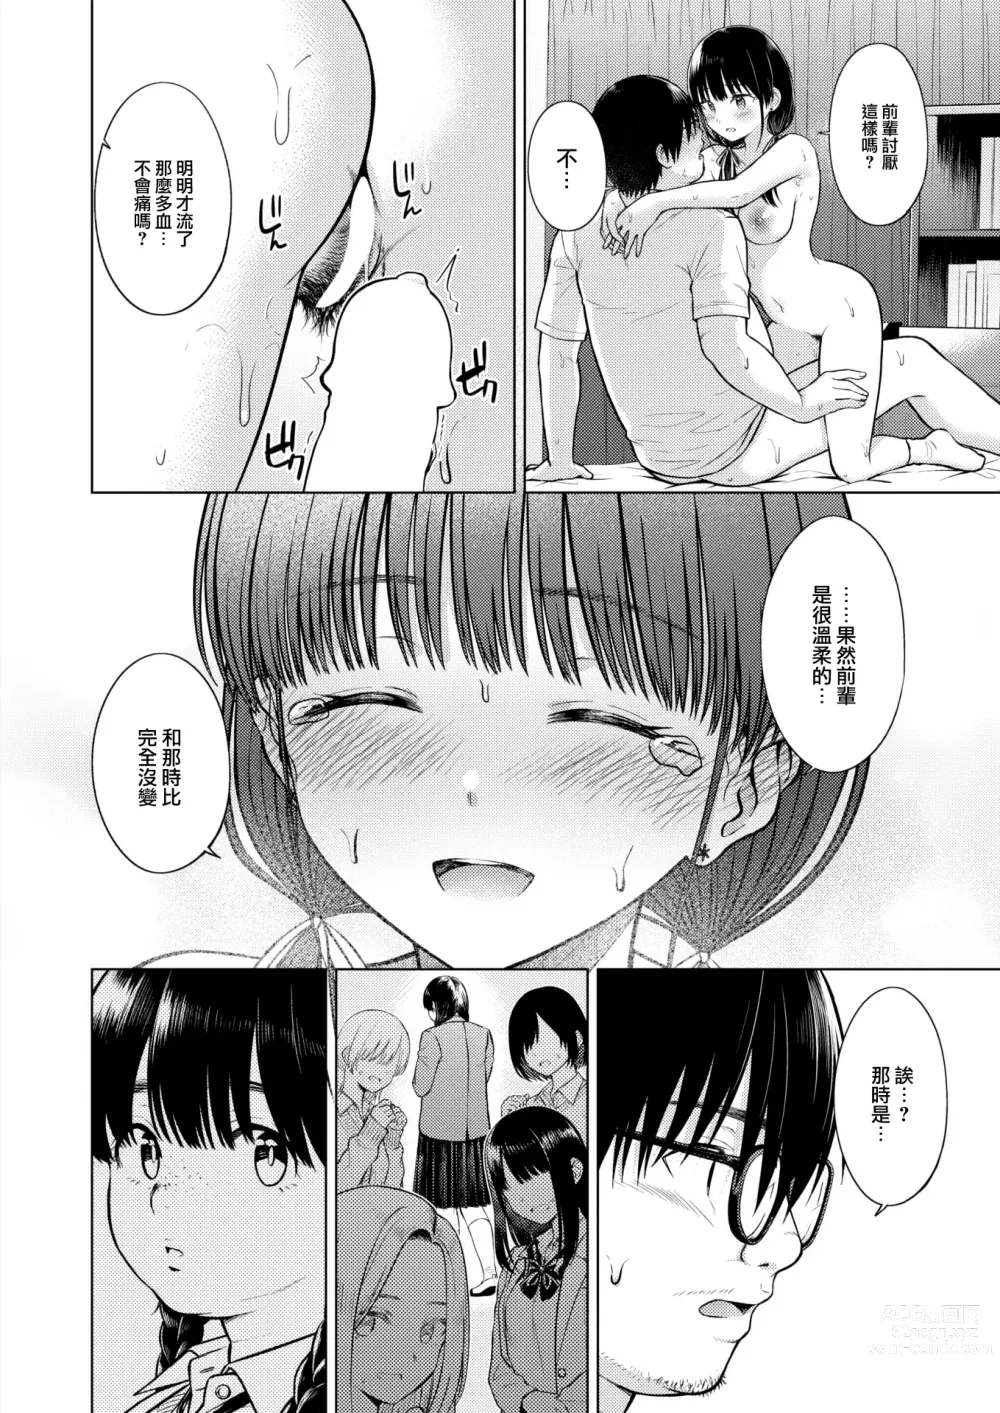 Page 19 of manga Cutie Chaser